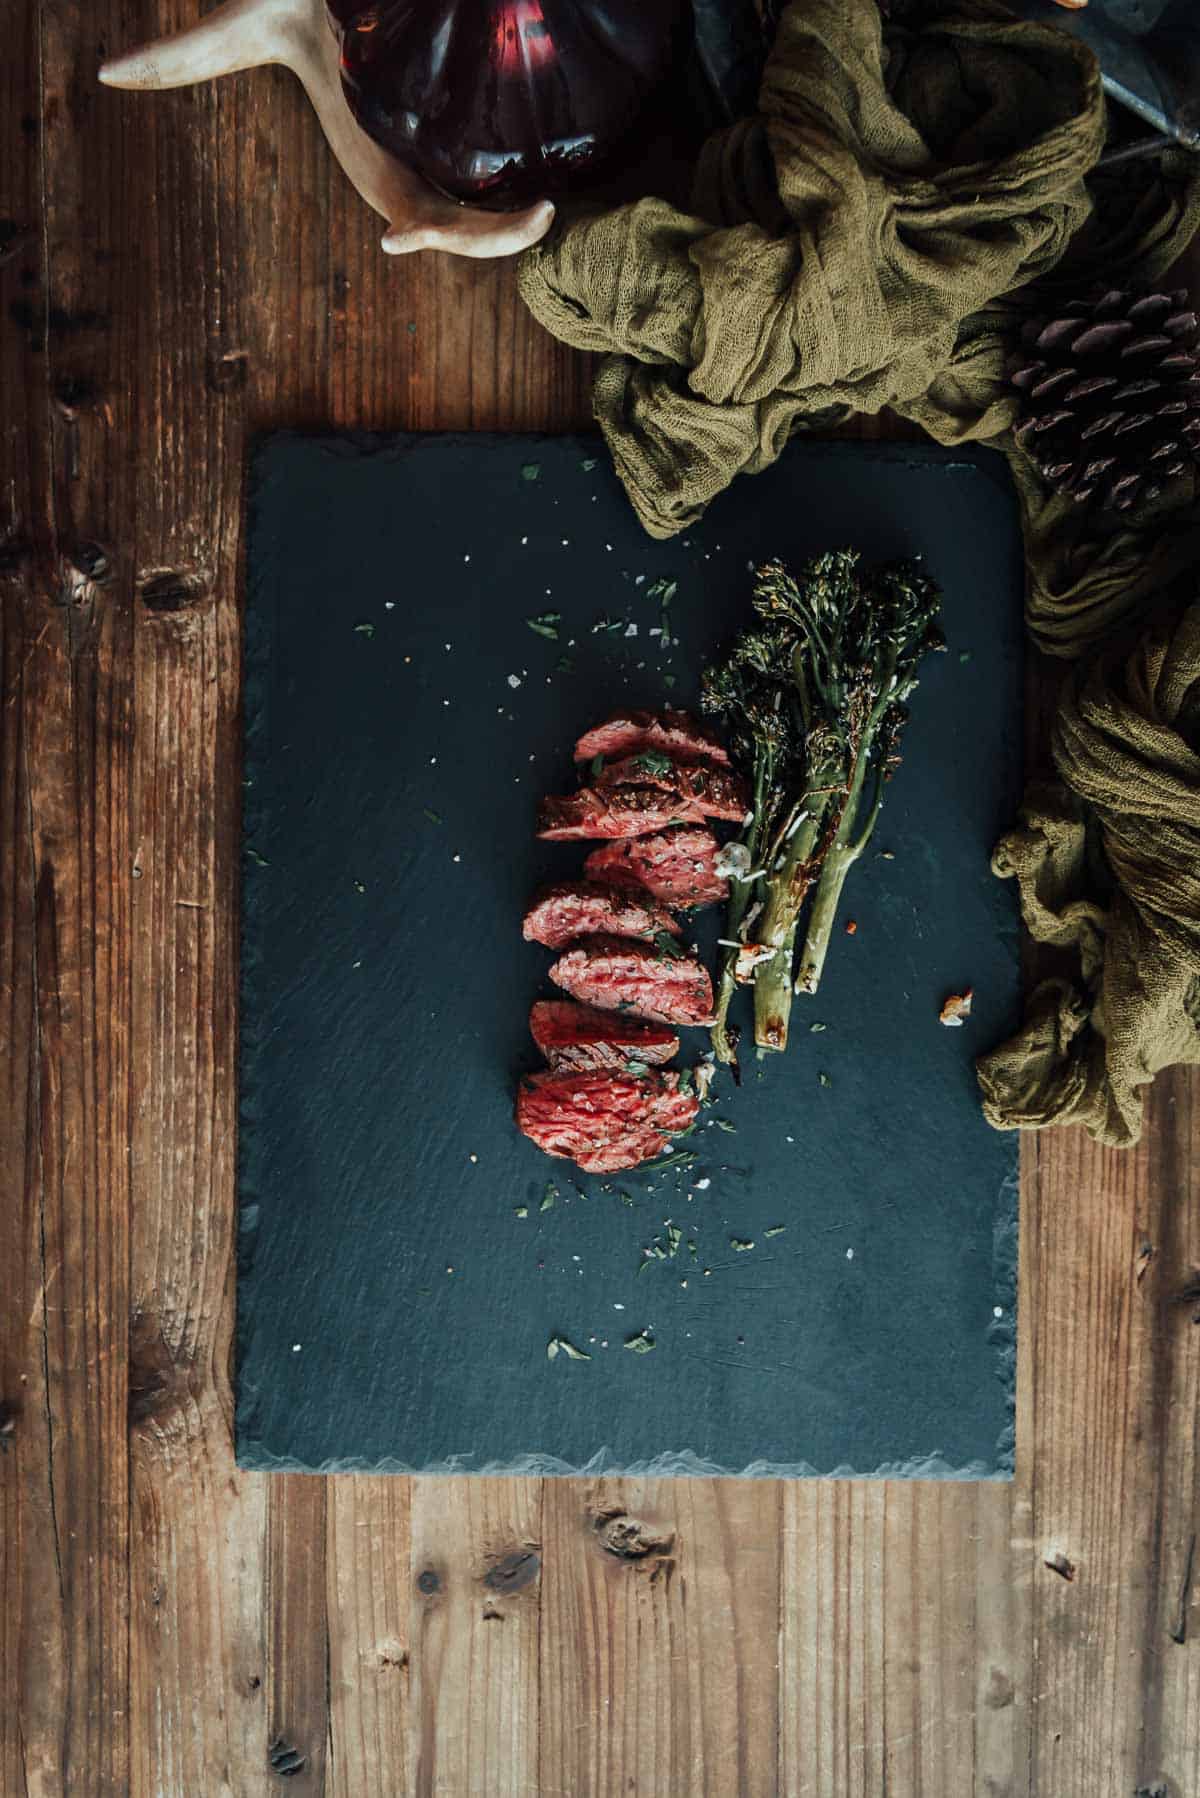 A sliced hanger steak on a slate plate on a wooden table.